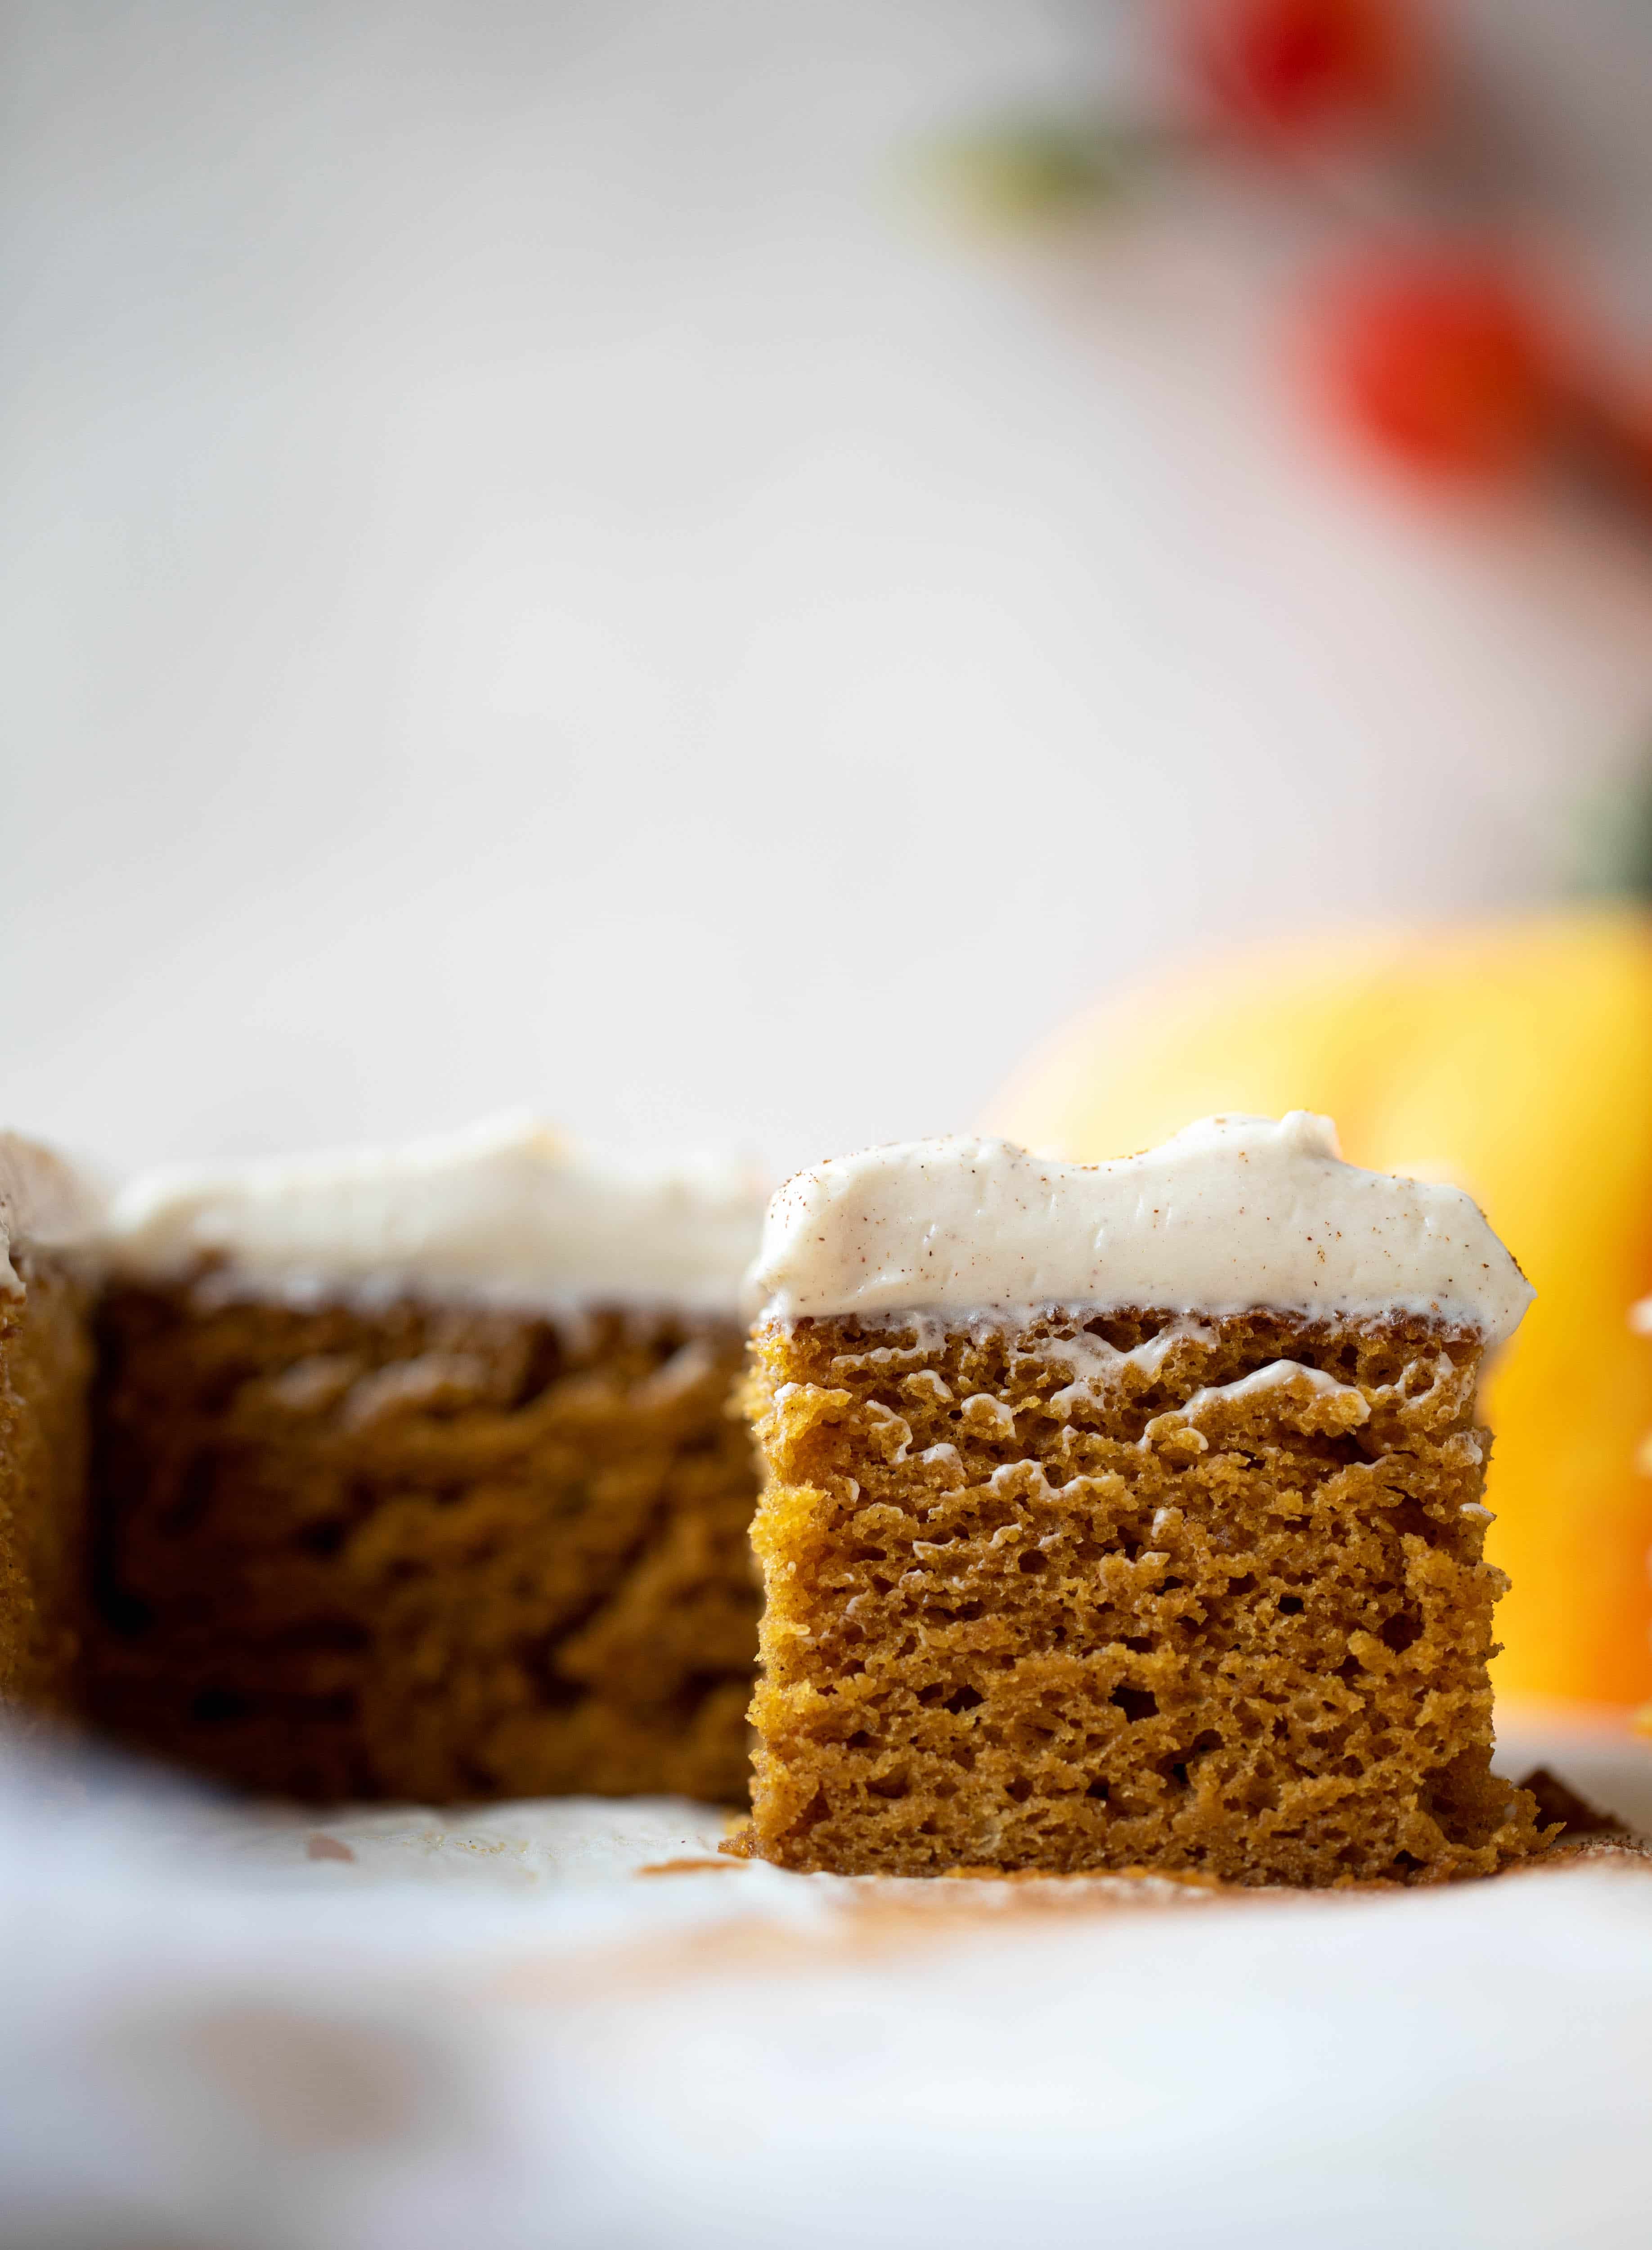 This pumpkin sheet cake is a legit pumpkin dream cake! It's so moist and fluffy and flavorful. With a blanket of cinnamon cream cheese frosting!